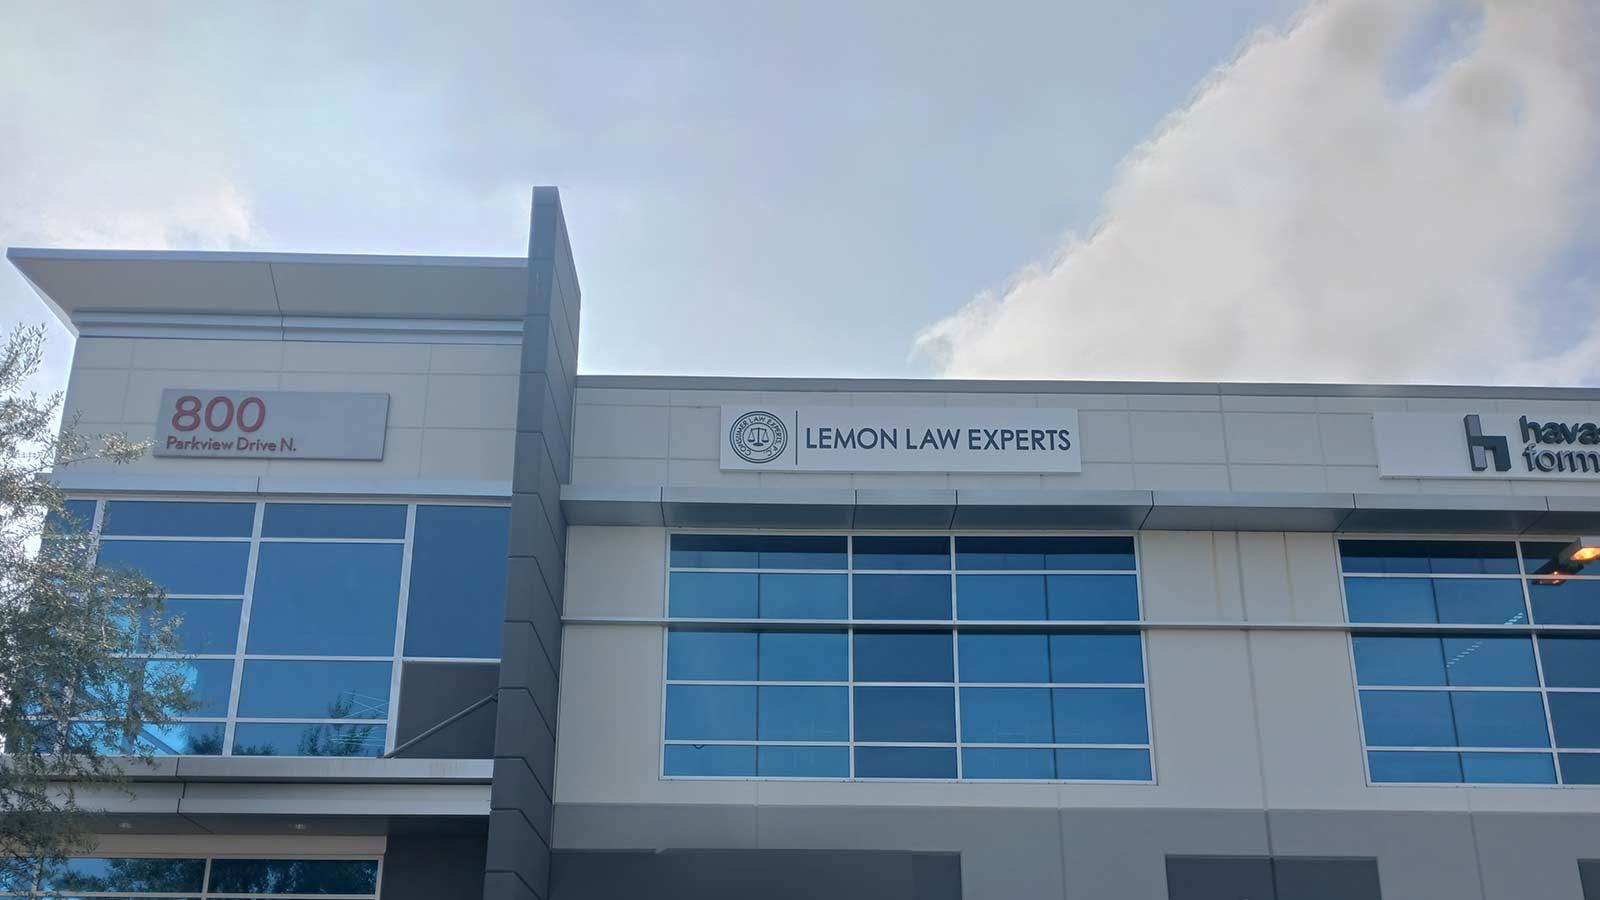 Lemon Law Experts logo sign mounted on the building